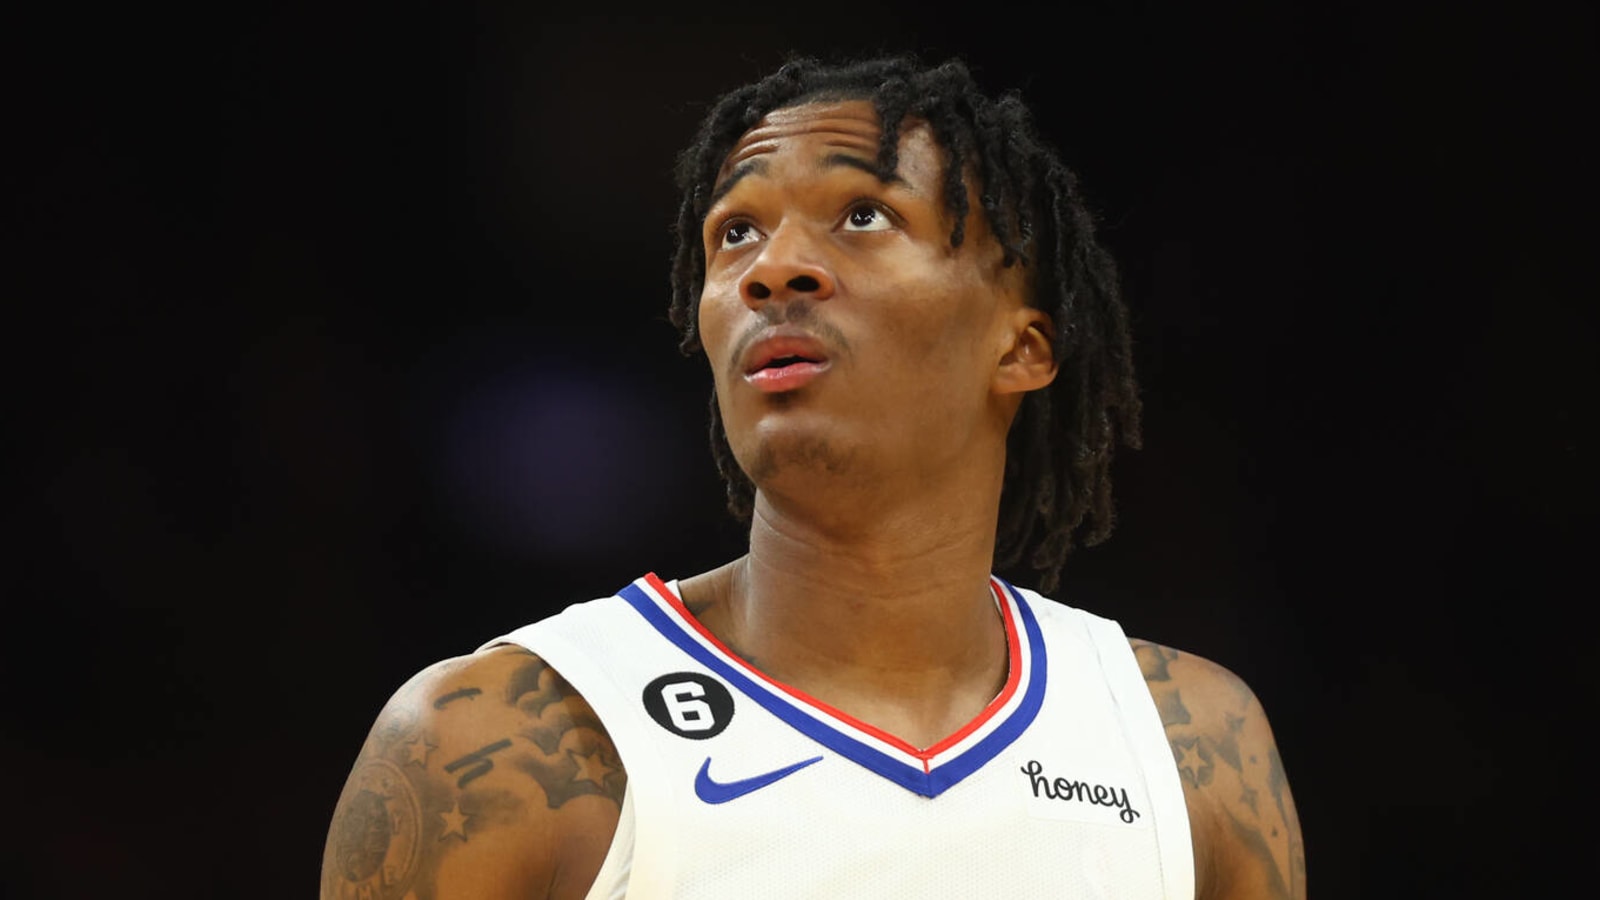 Clippers guard says he doesn't know how in-season tournament works